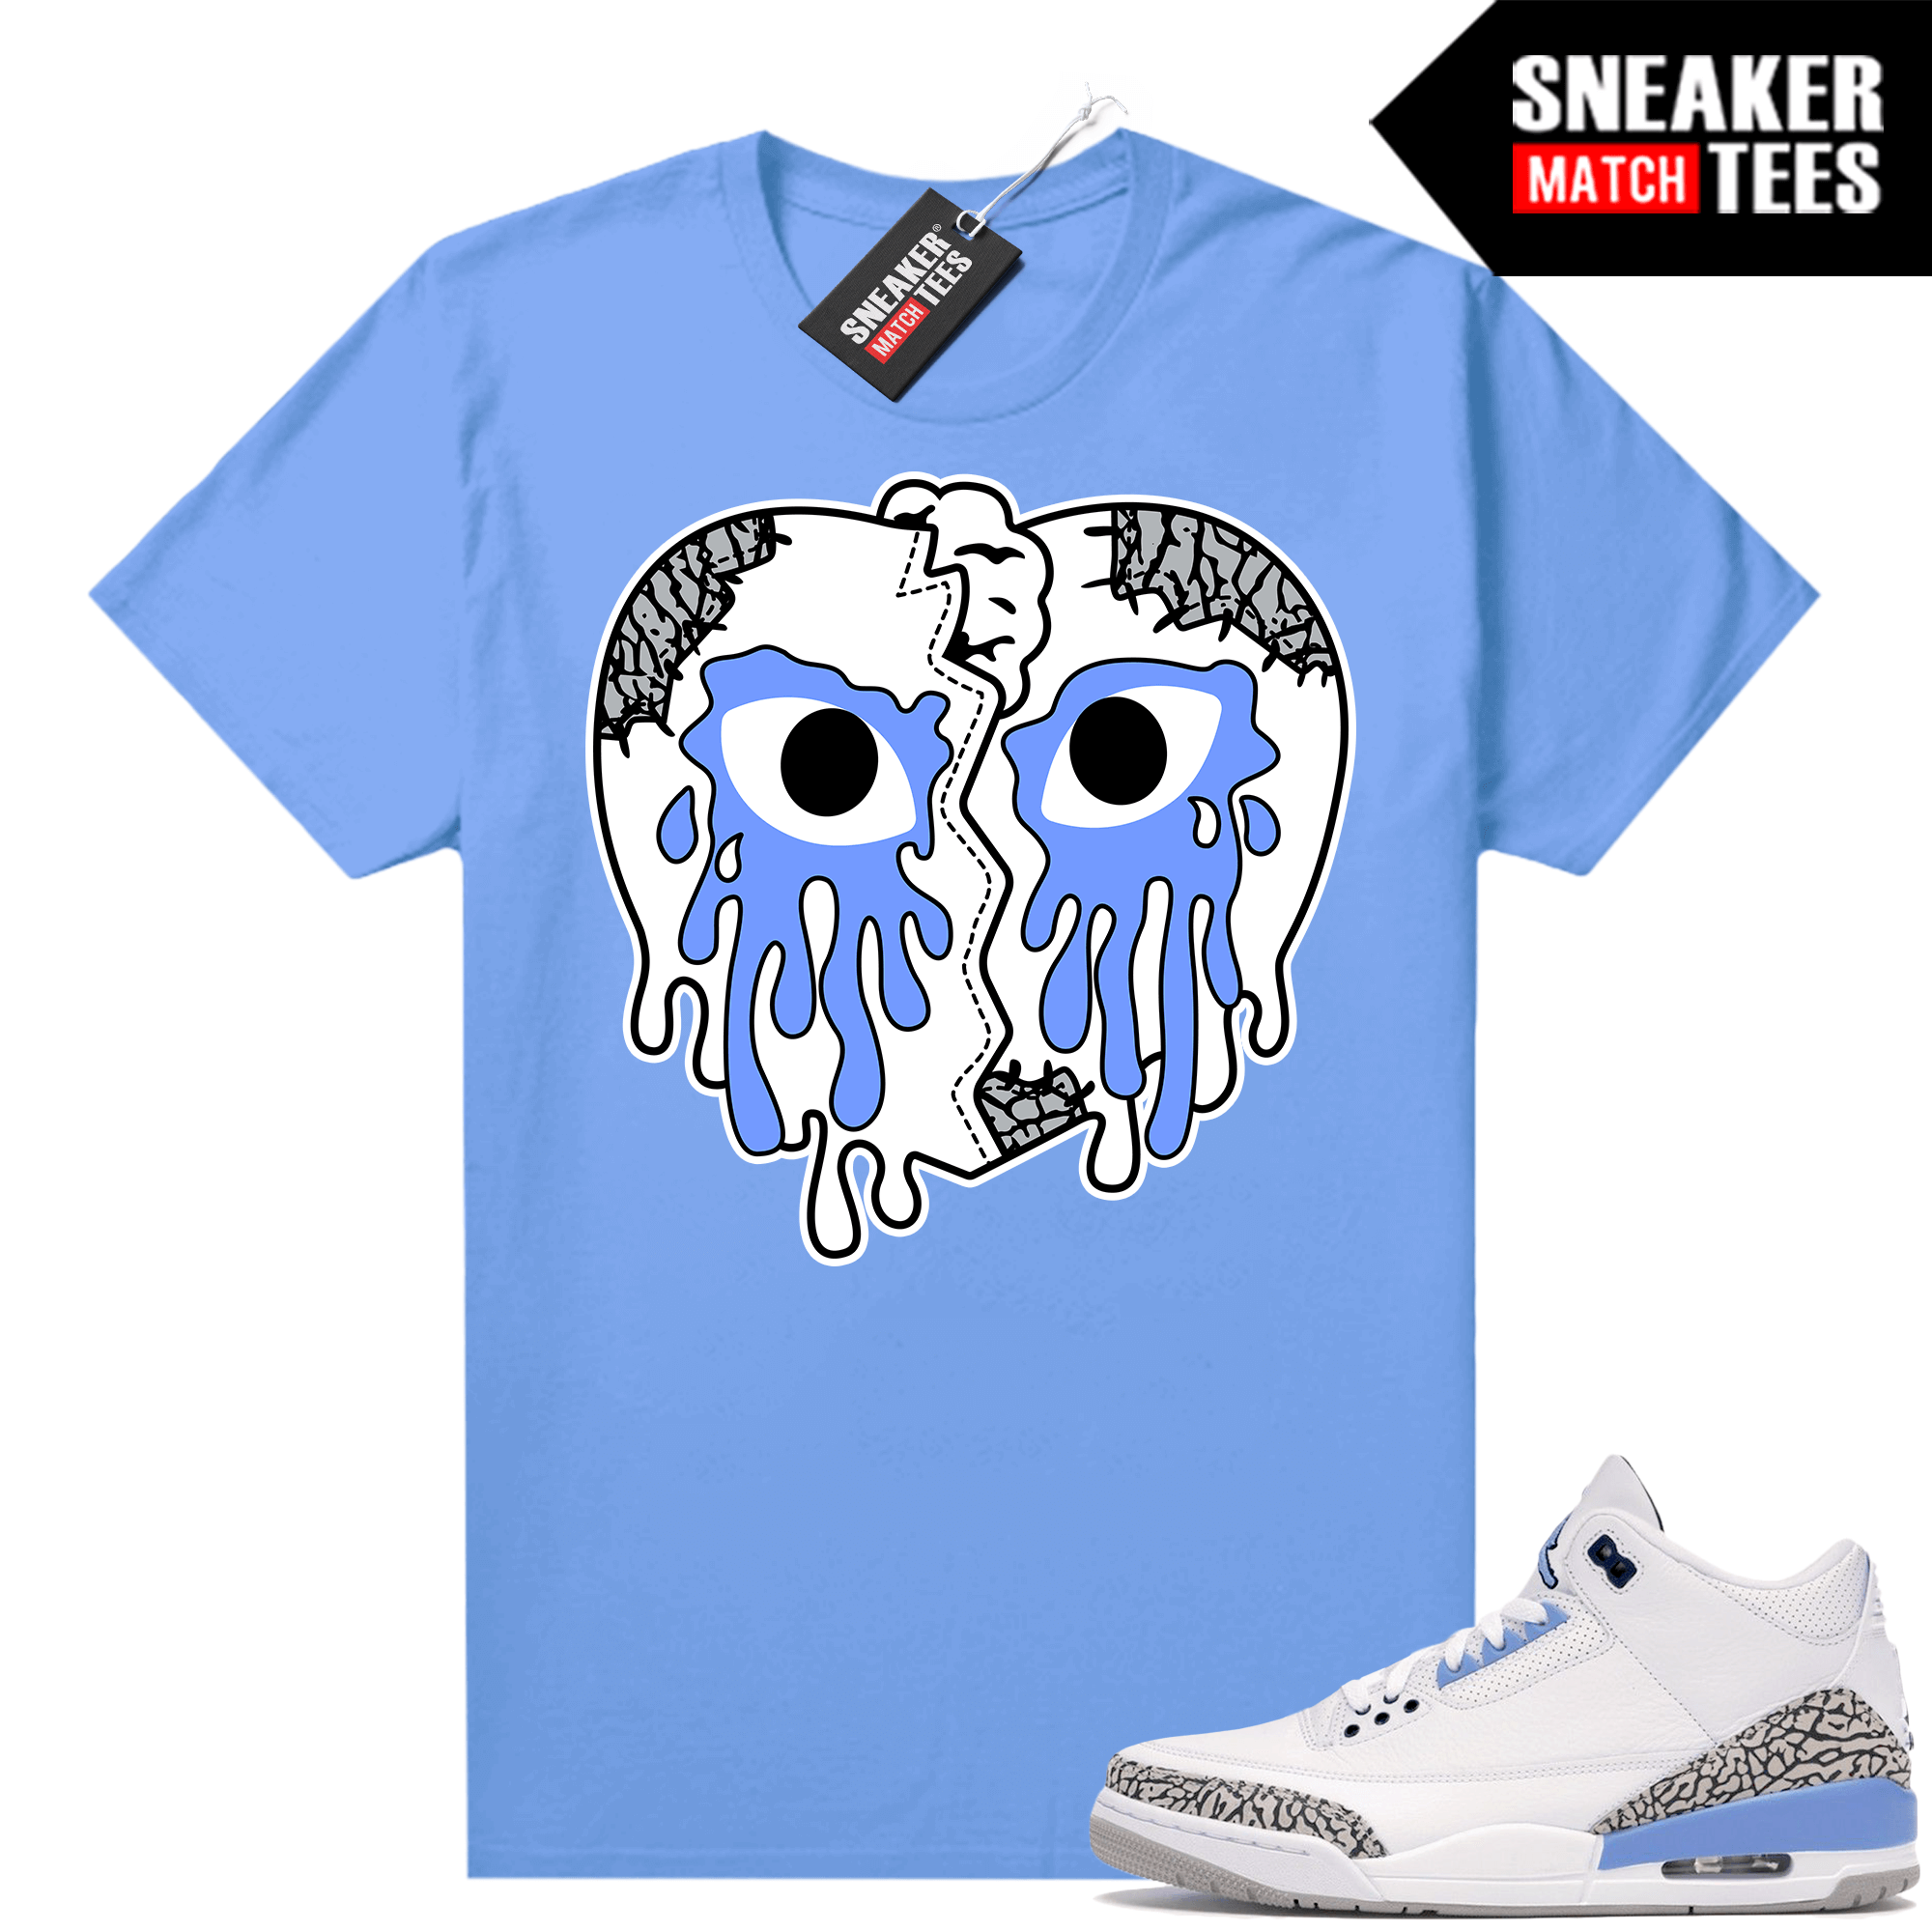 UNC 3s Shirts to match Sneaker Match Tees University Blue Crying Heart